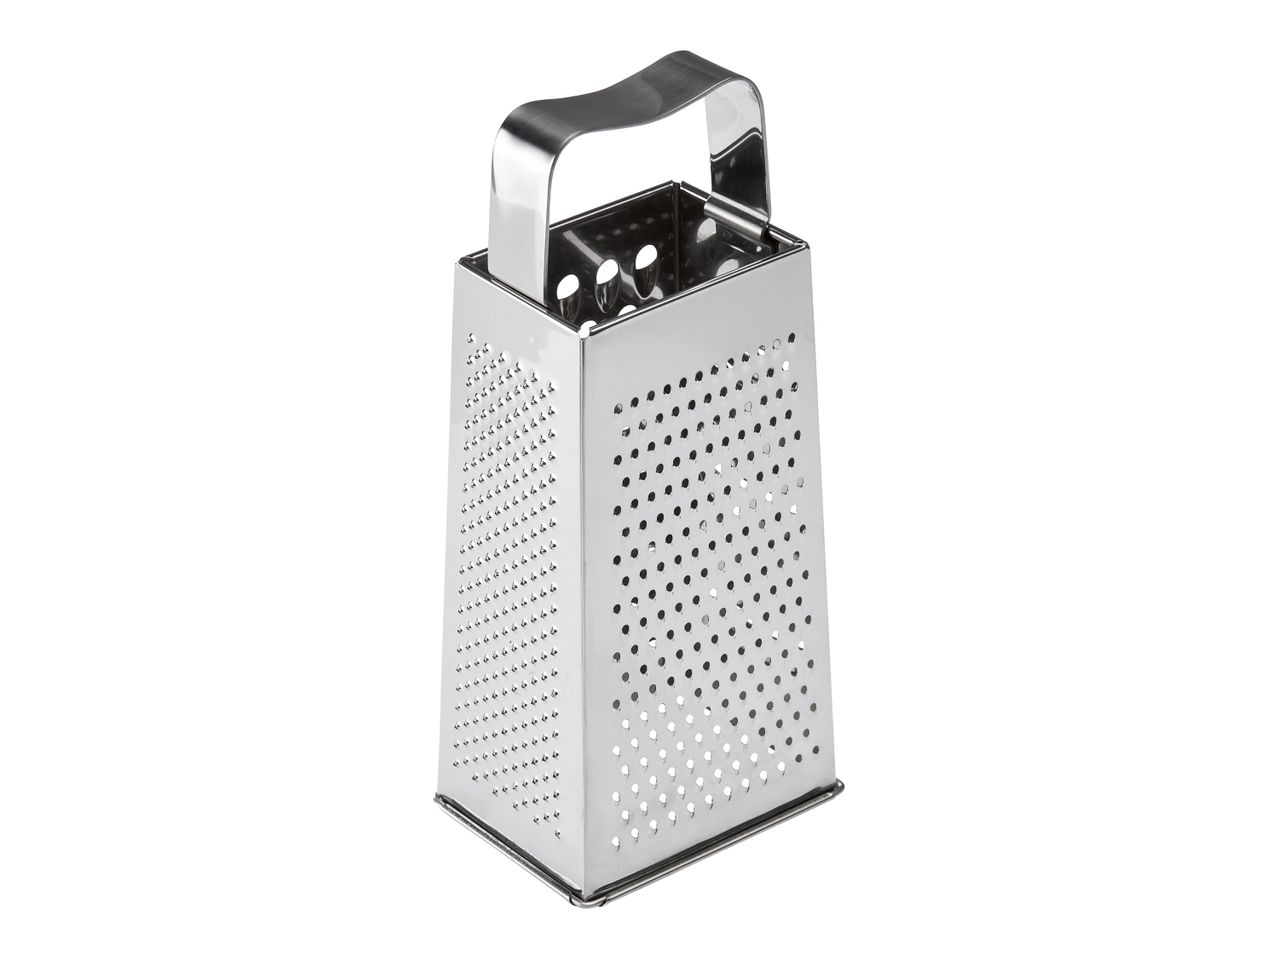 Go to full screen view: Kitchen Grater or Grater Set - Image 2